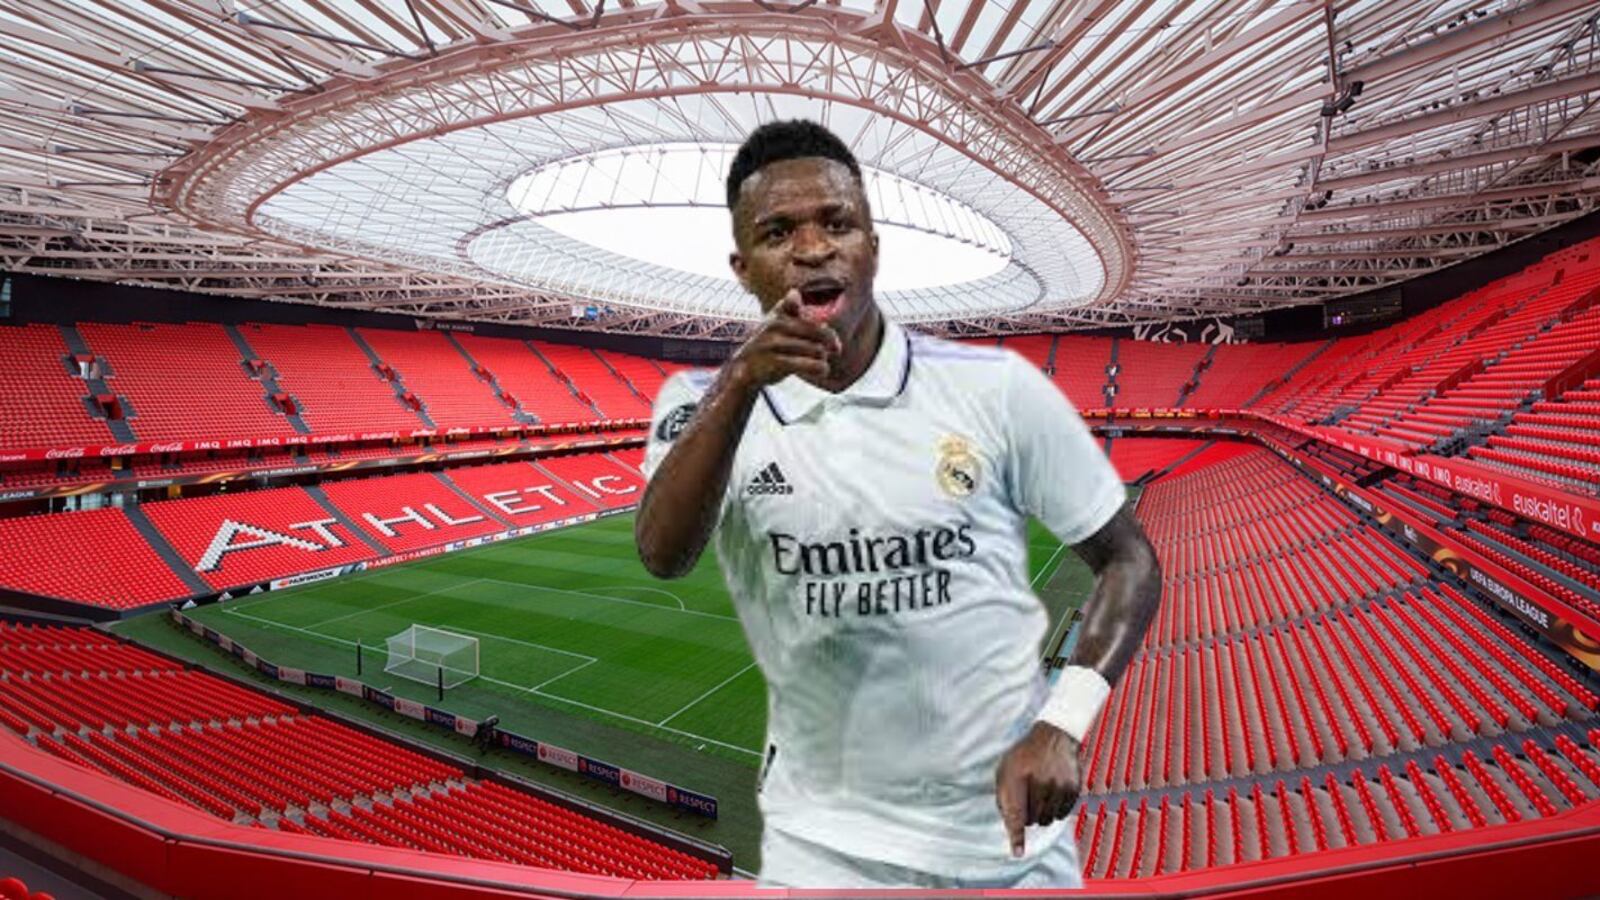 While they accuse him of causing trouble, Vinicius's grand gesture in Bilbao